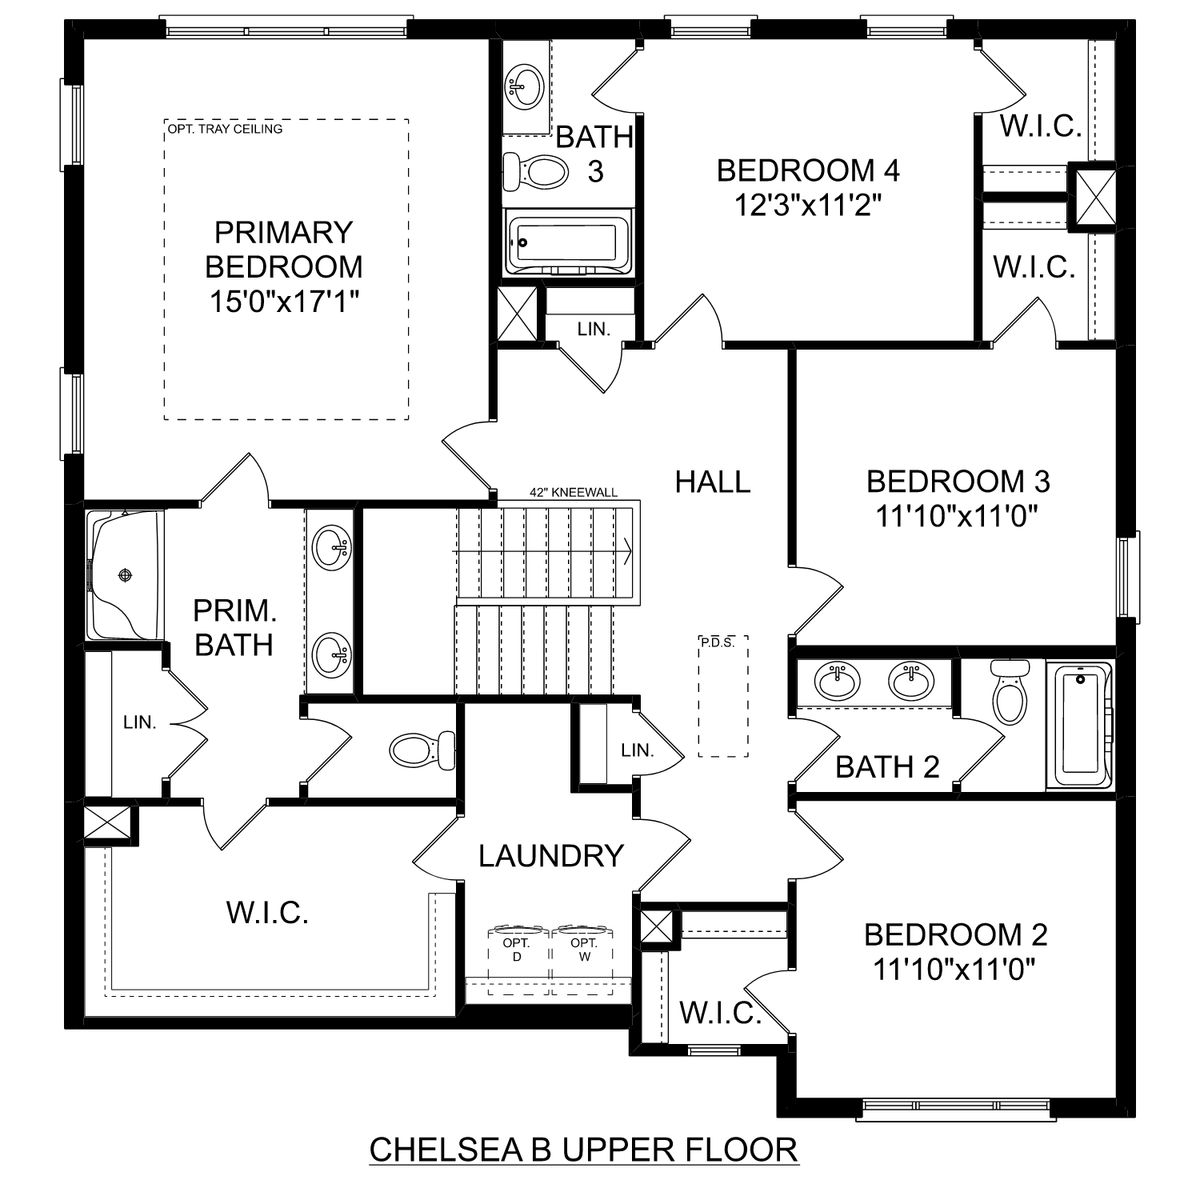 2 - The Chelsea B floor plan layout for 142 Hazel Pine Trail in Davidson Homes' Clearview community.